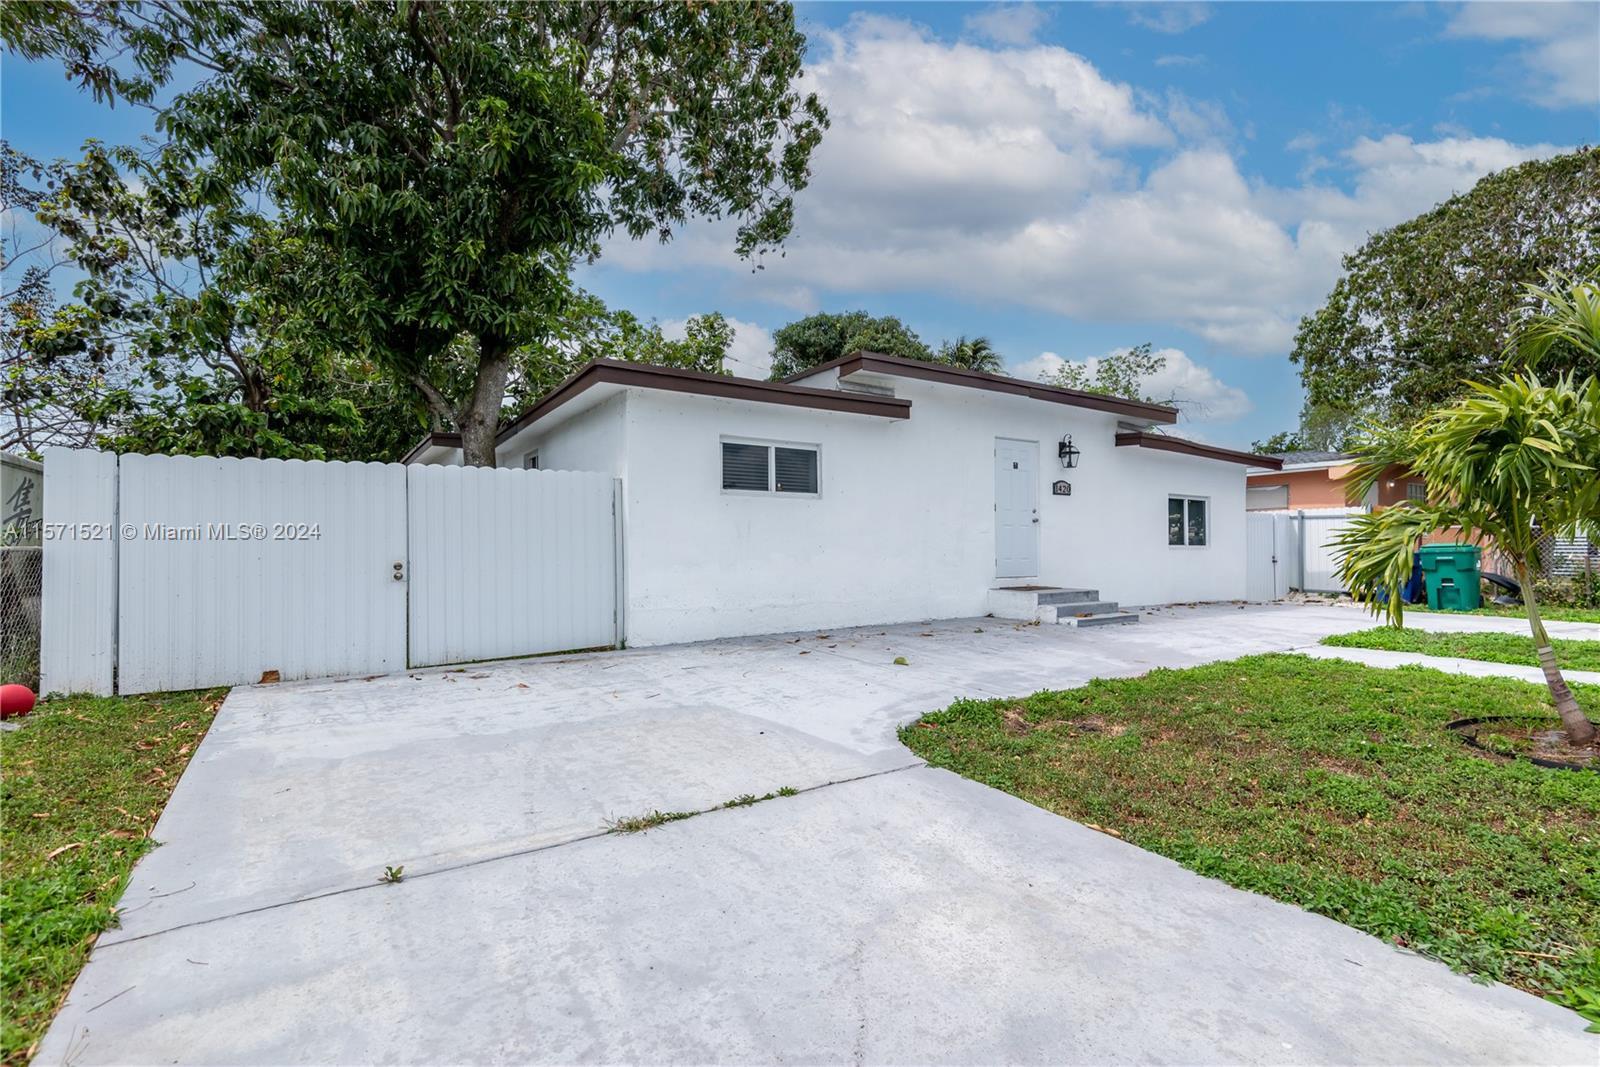 Photo of 1420 NW 116th St in Miami, FL